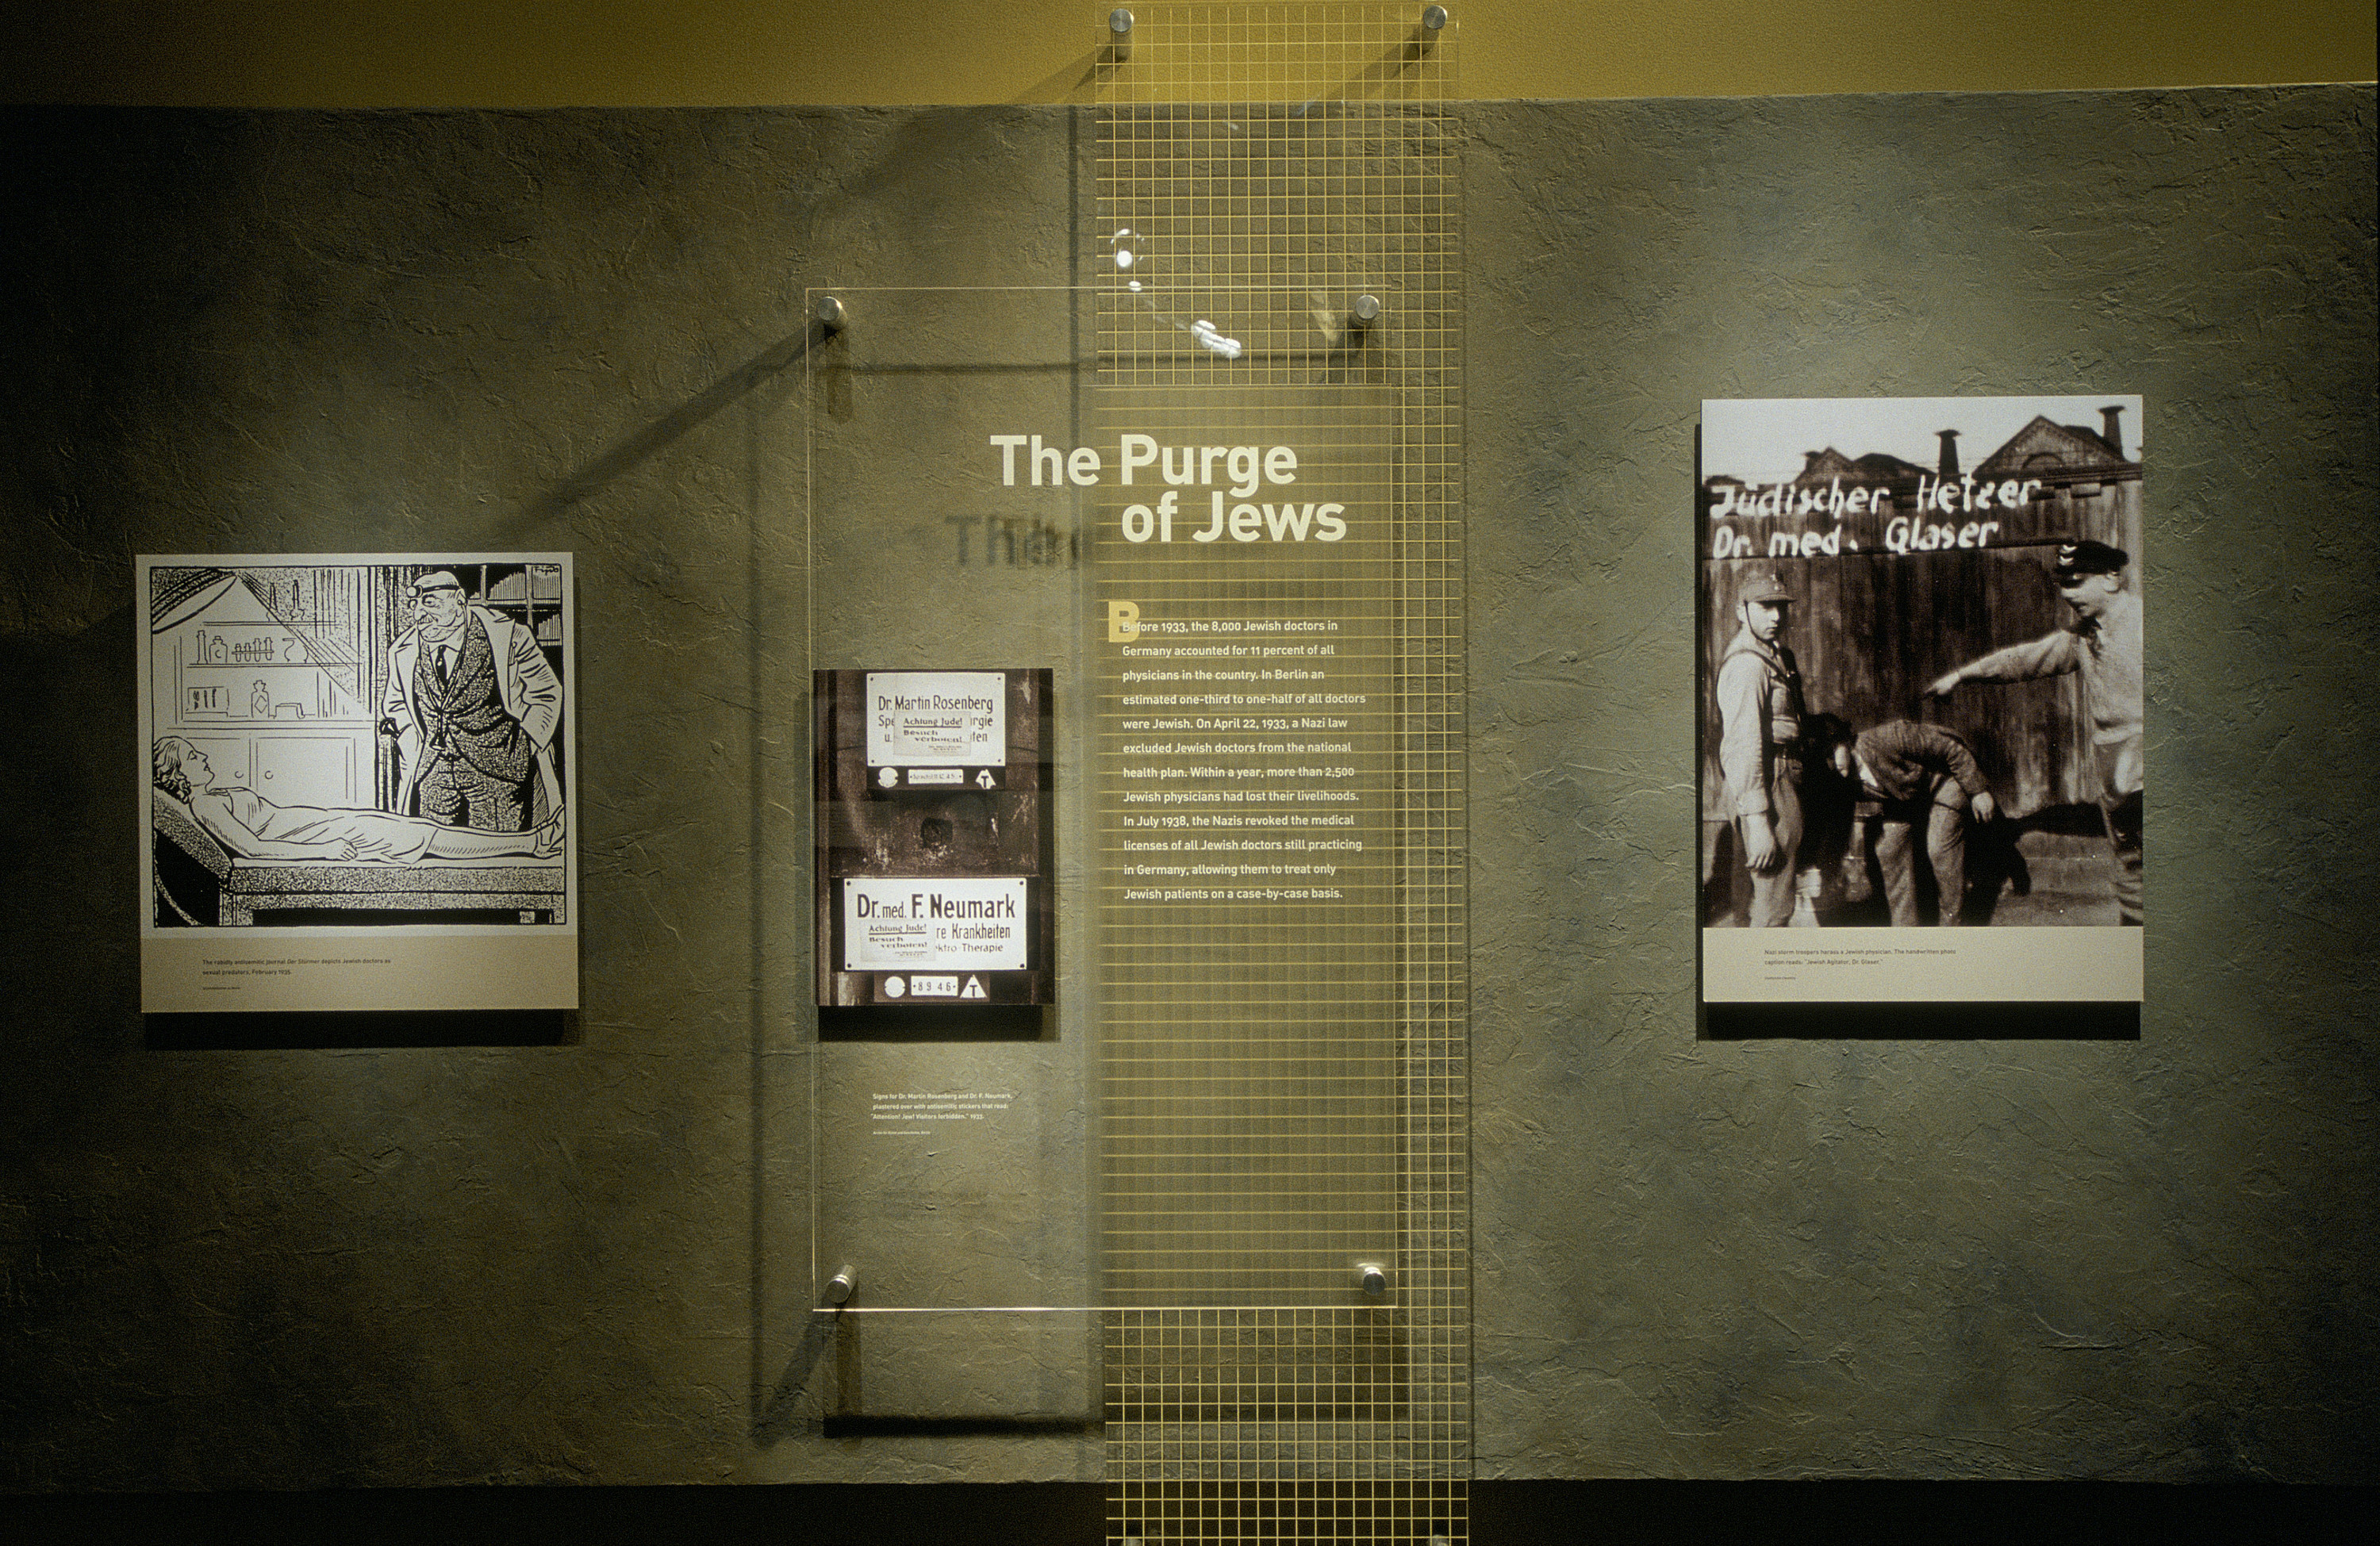 One segment from the special exhibition, "Deadly Medicine: Creating the Master Race," U.S. Holocaust Memorial Museum, which opened on  April 22, 2004.